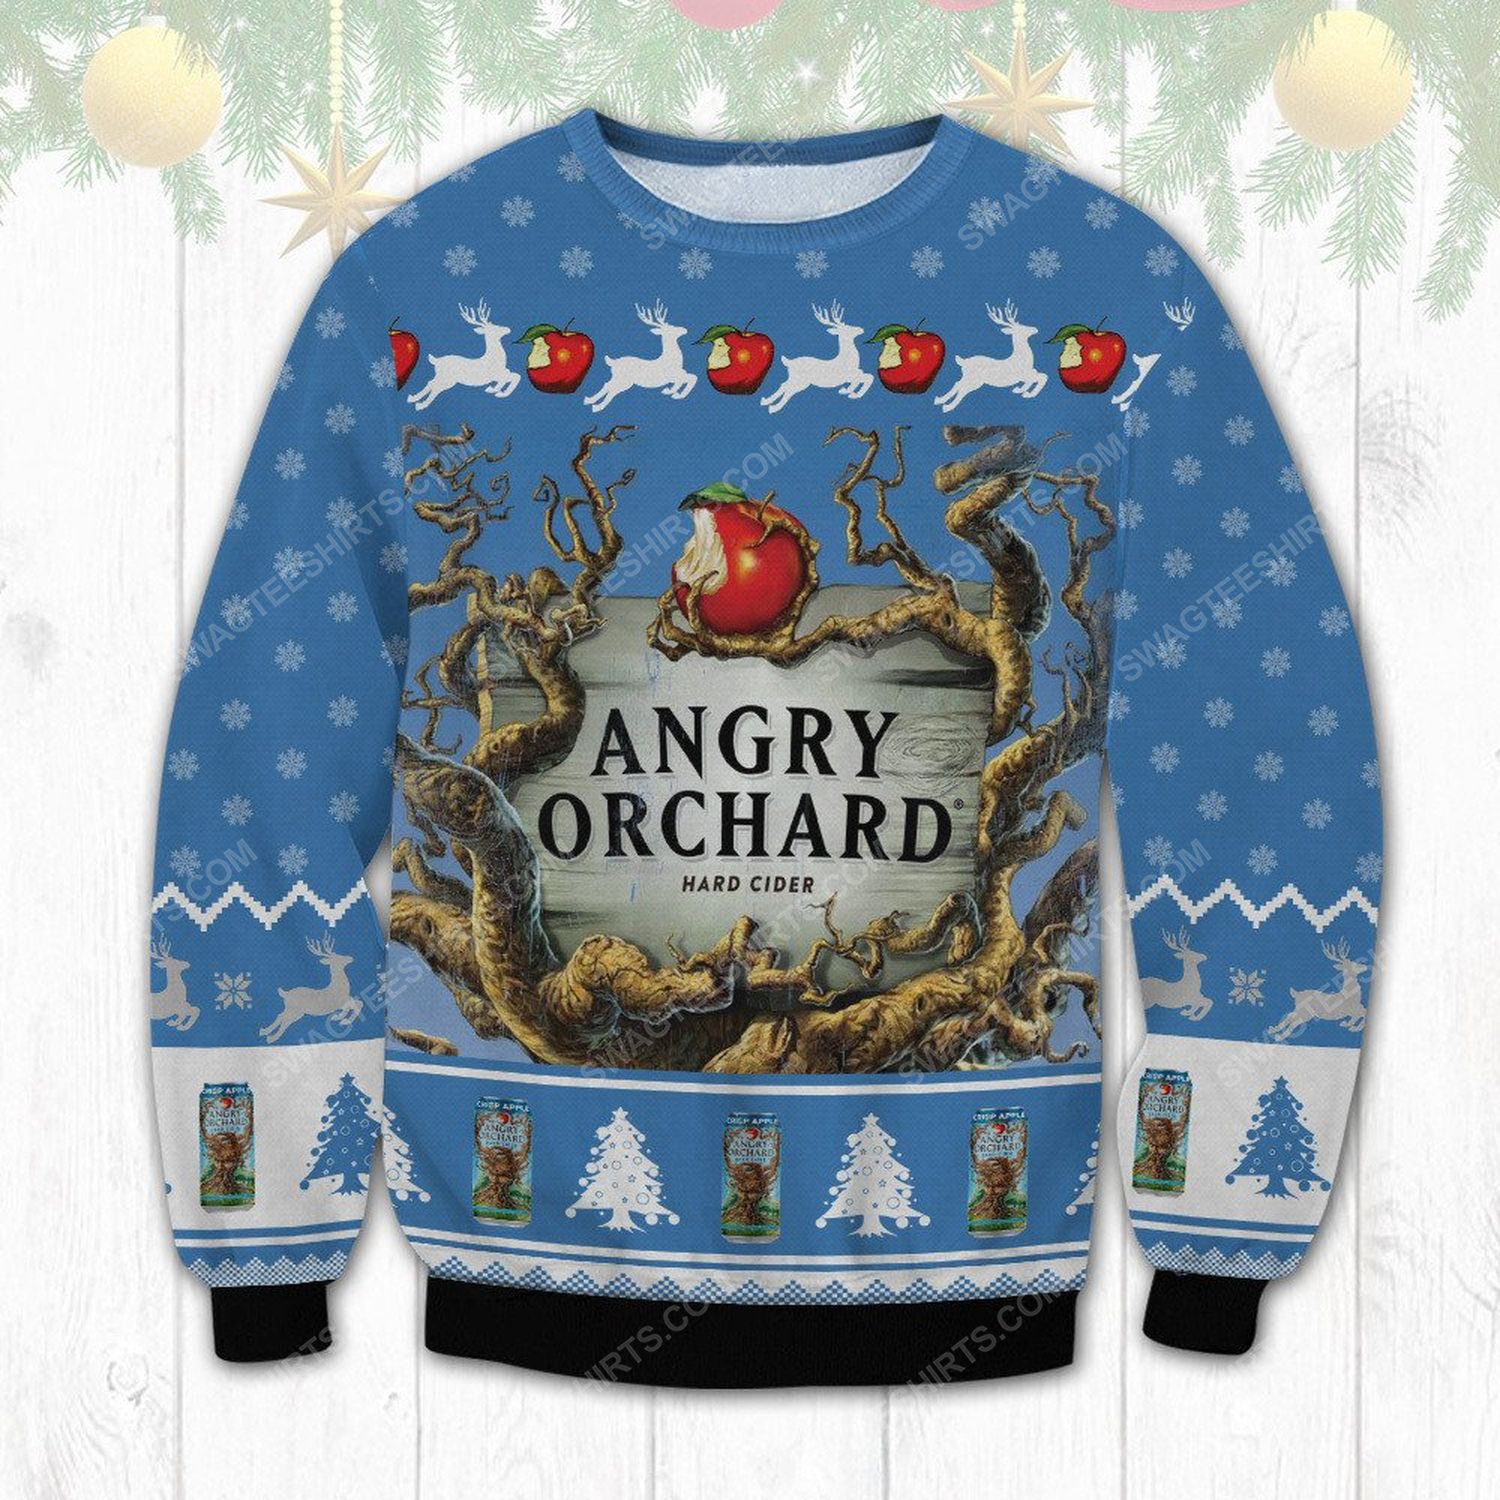 Angry orchard hard cider ugly christmas sweater 1 - Copy (2)